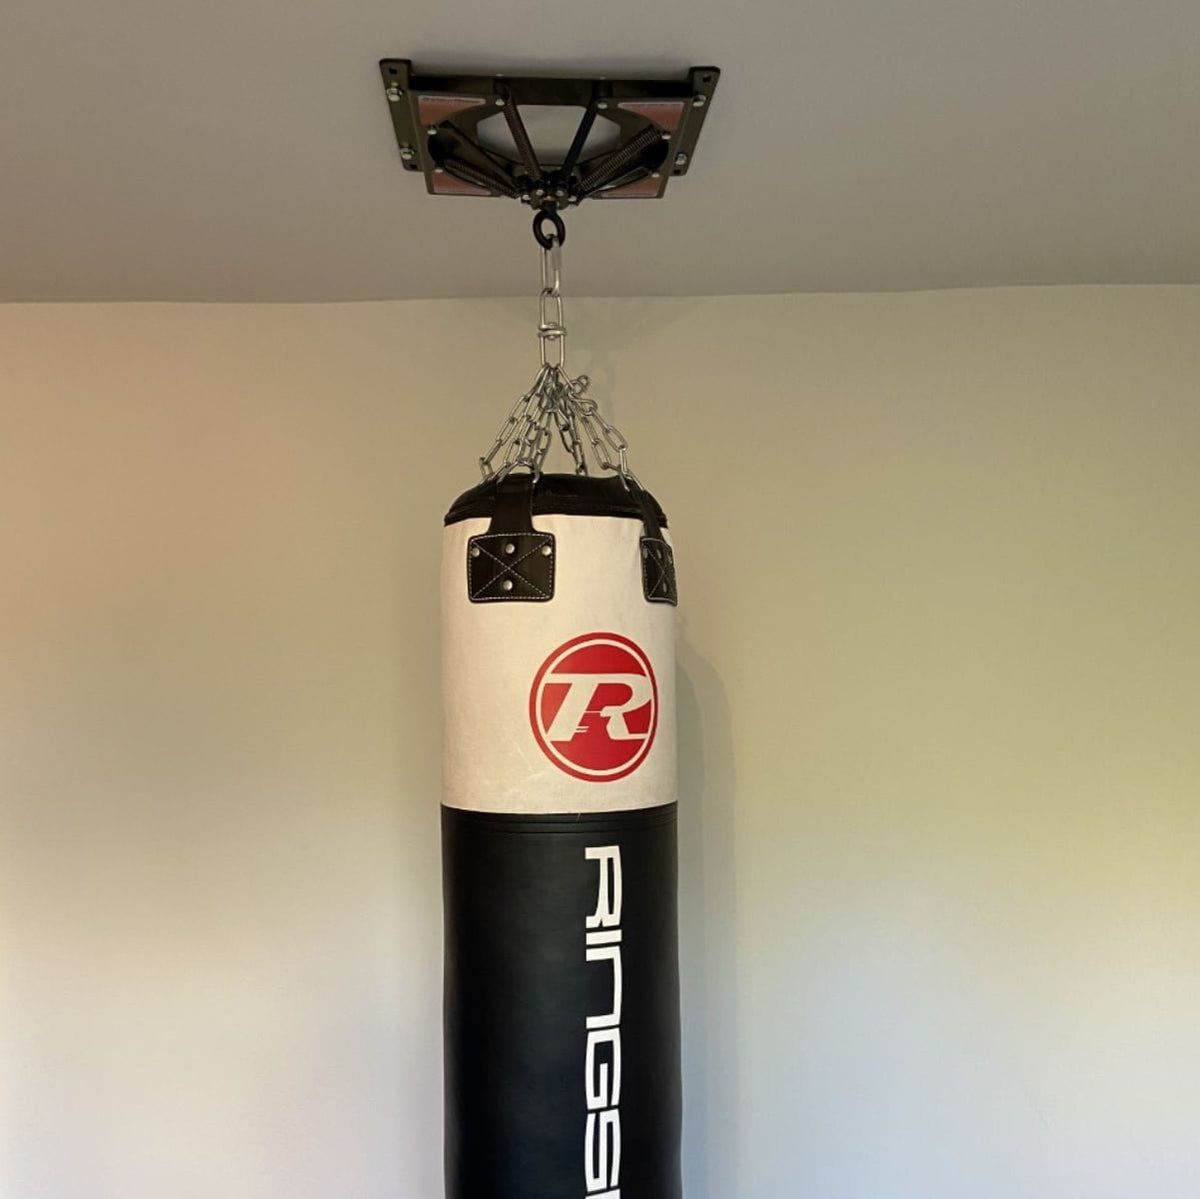 Heavy Bag Wall Mount by Yes4all - Tips to make installation a breeze #Boxing  #HomeGym #HeavyBag #DIY - YouTube